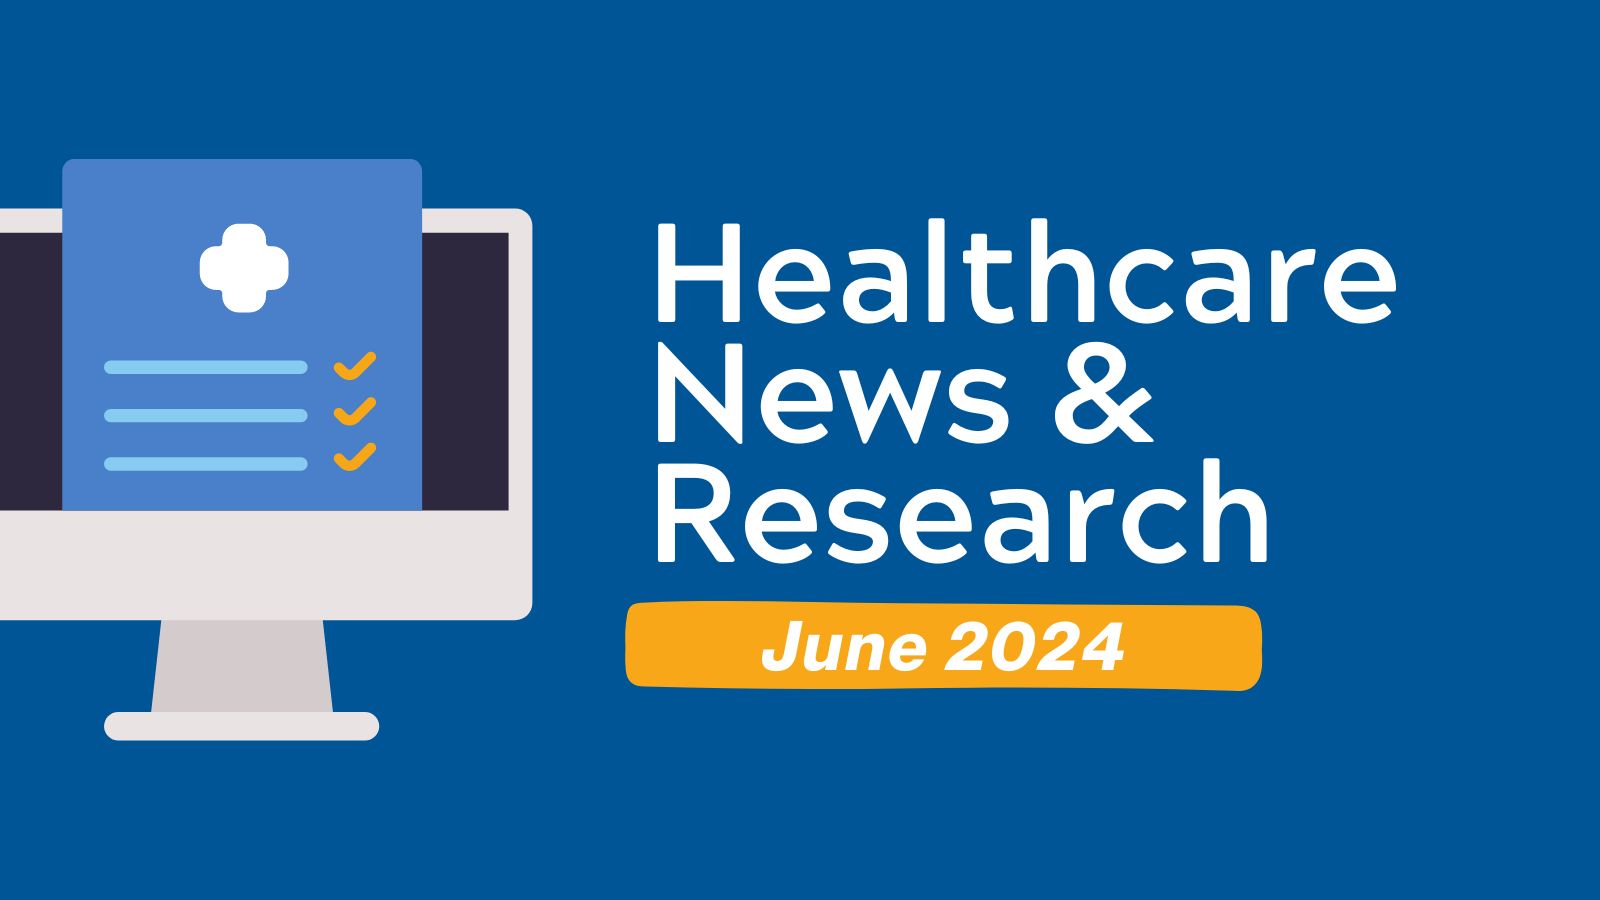 Healthcare News & Research - June 2024